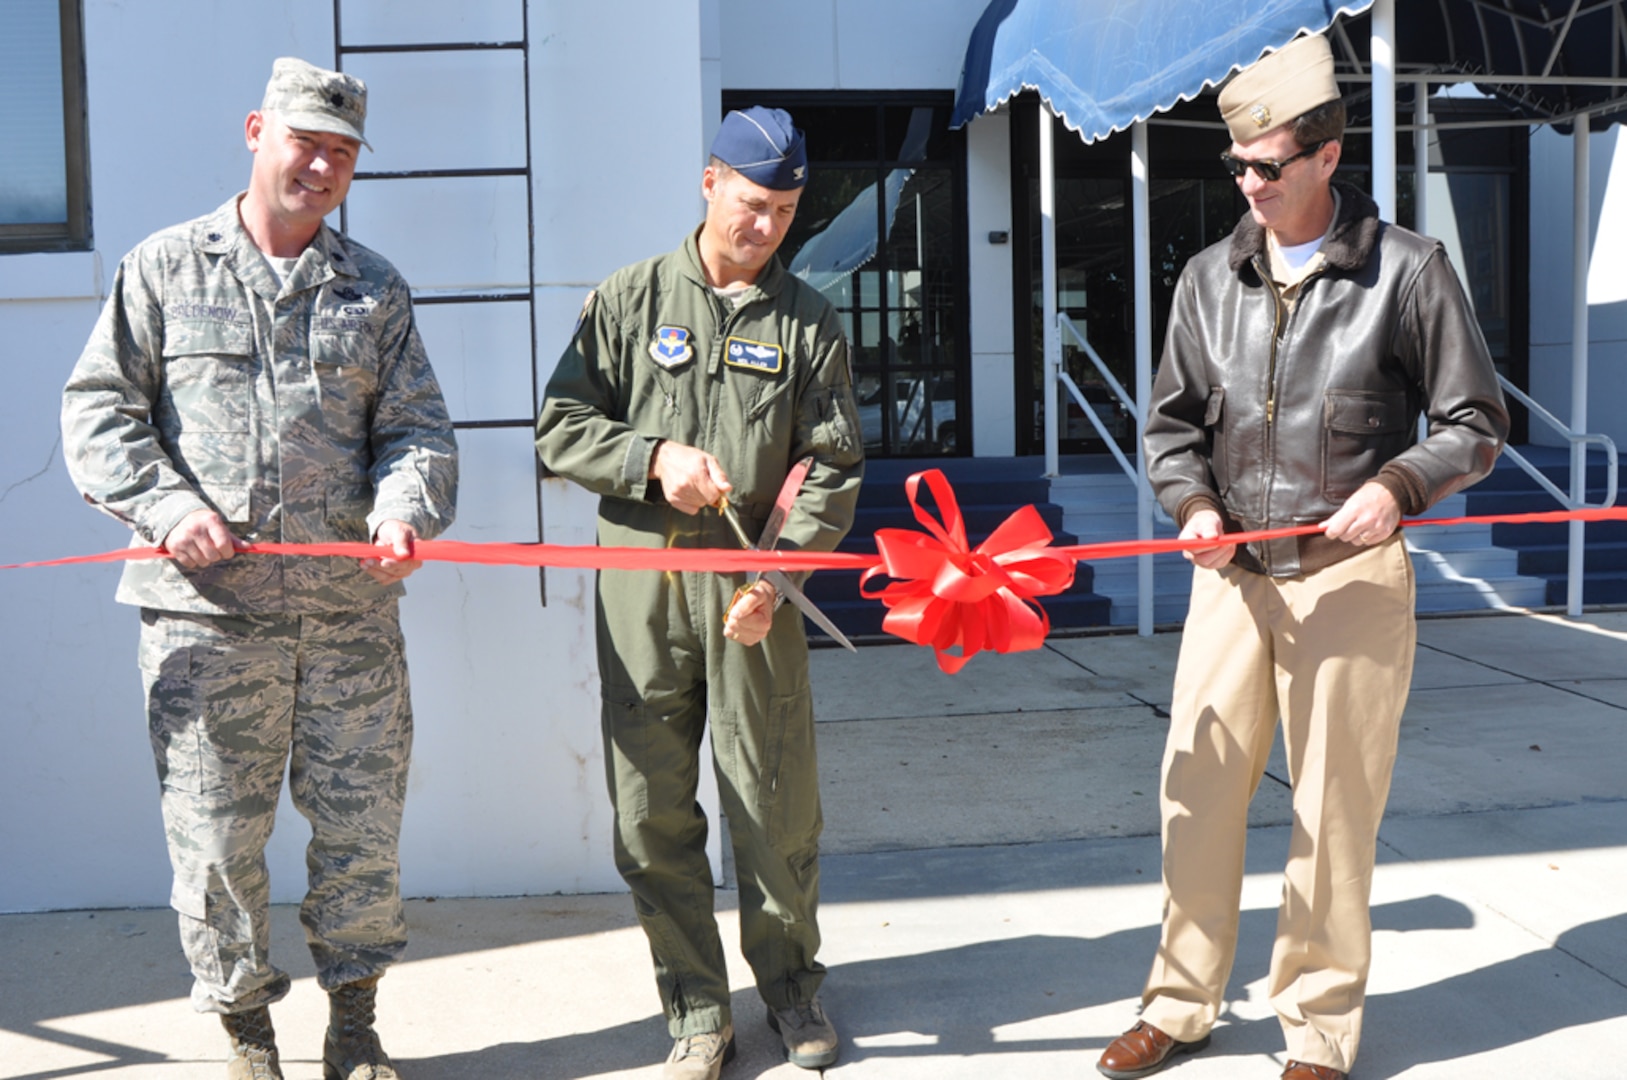 Lt. Col. Justin Boldenow, 479th Operations Support Squadron commander, Col. Neil Allen, 479th Flying Training Group commander, and Navy Capt. Christopher  Plummer, Naval Air Station Pensacola commander, cut the ribbon for the 479th OSS' Pensacola Regional Communications Facility, Oct. 31 at Naval Air Station Pensacola, Fla.  The 3,400 square-foot facility houses a 23-person communications team that provides a full spectrum of services to all Air Force members in the Pensacola region to include Naval Air Stations Pensacola, Corry Station, and Whiting Field.  (U.S. Navy photo by Janet Thomas)